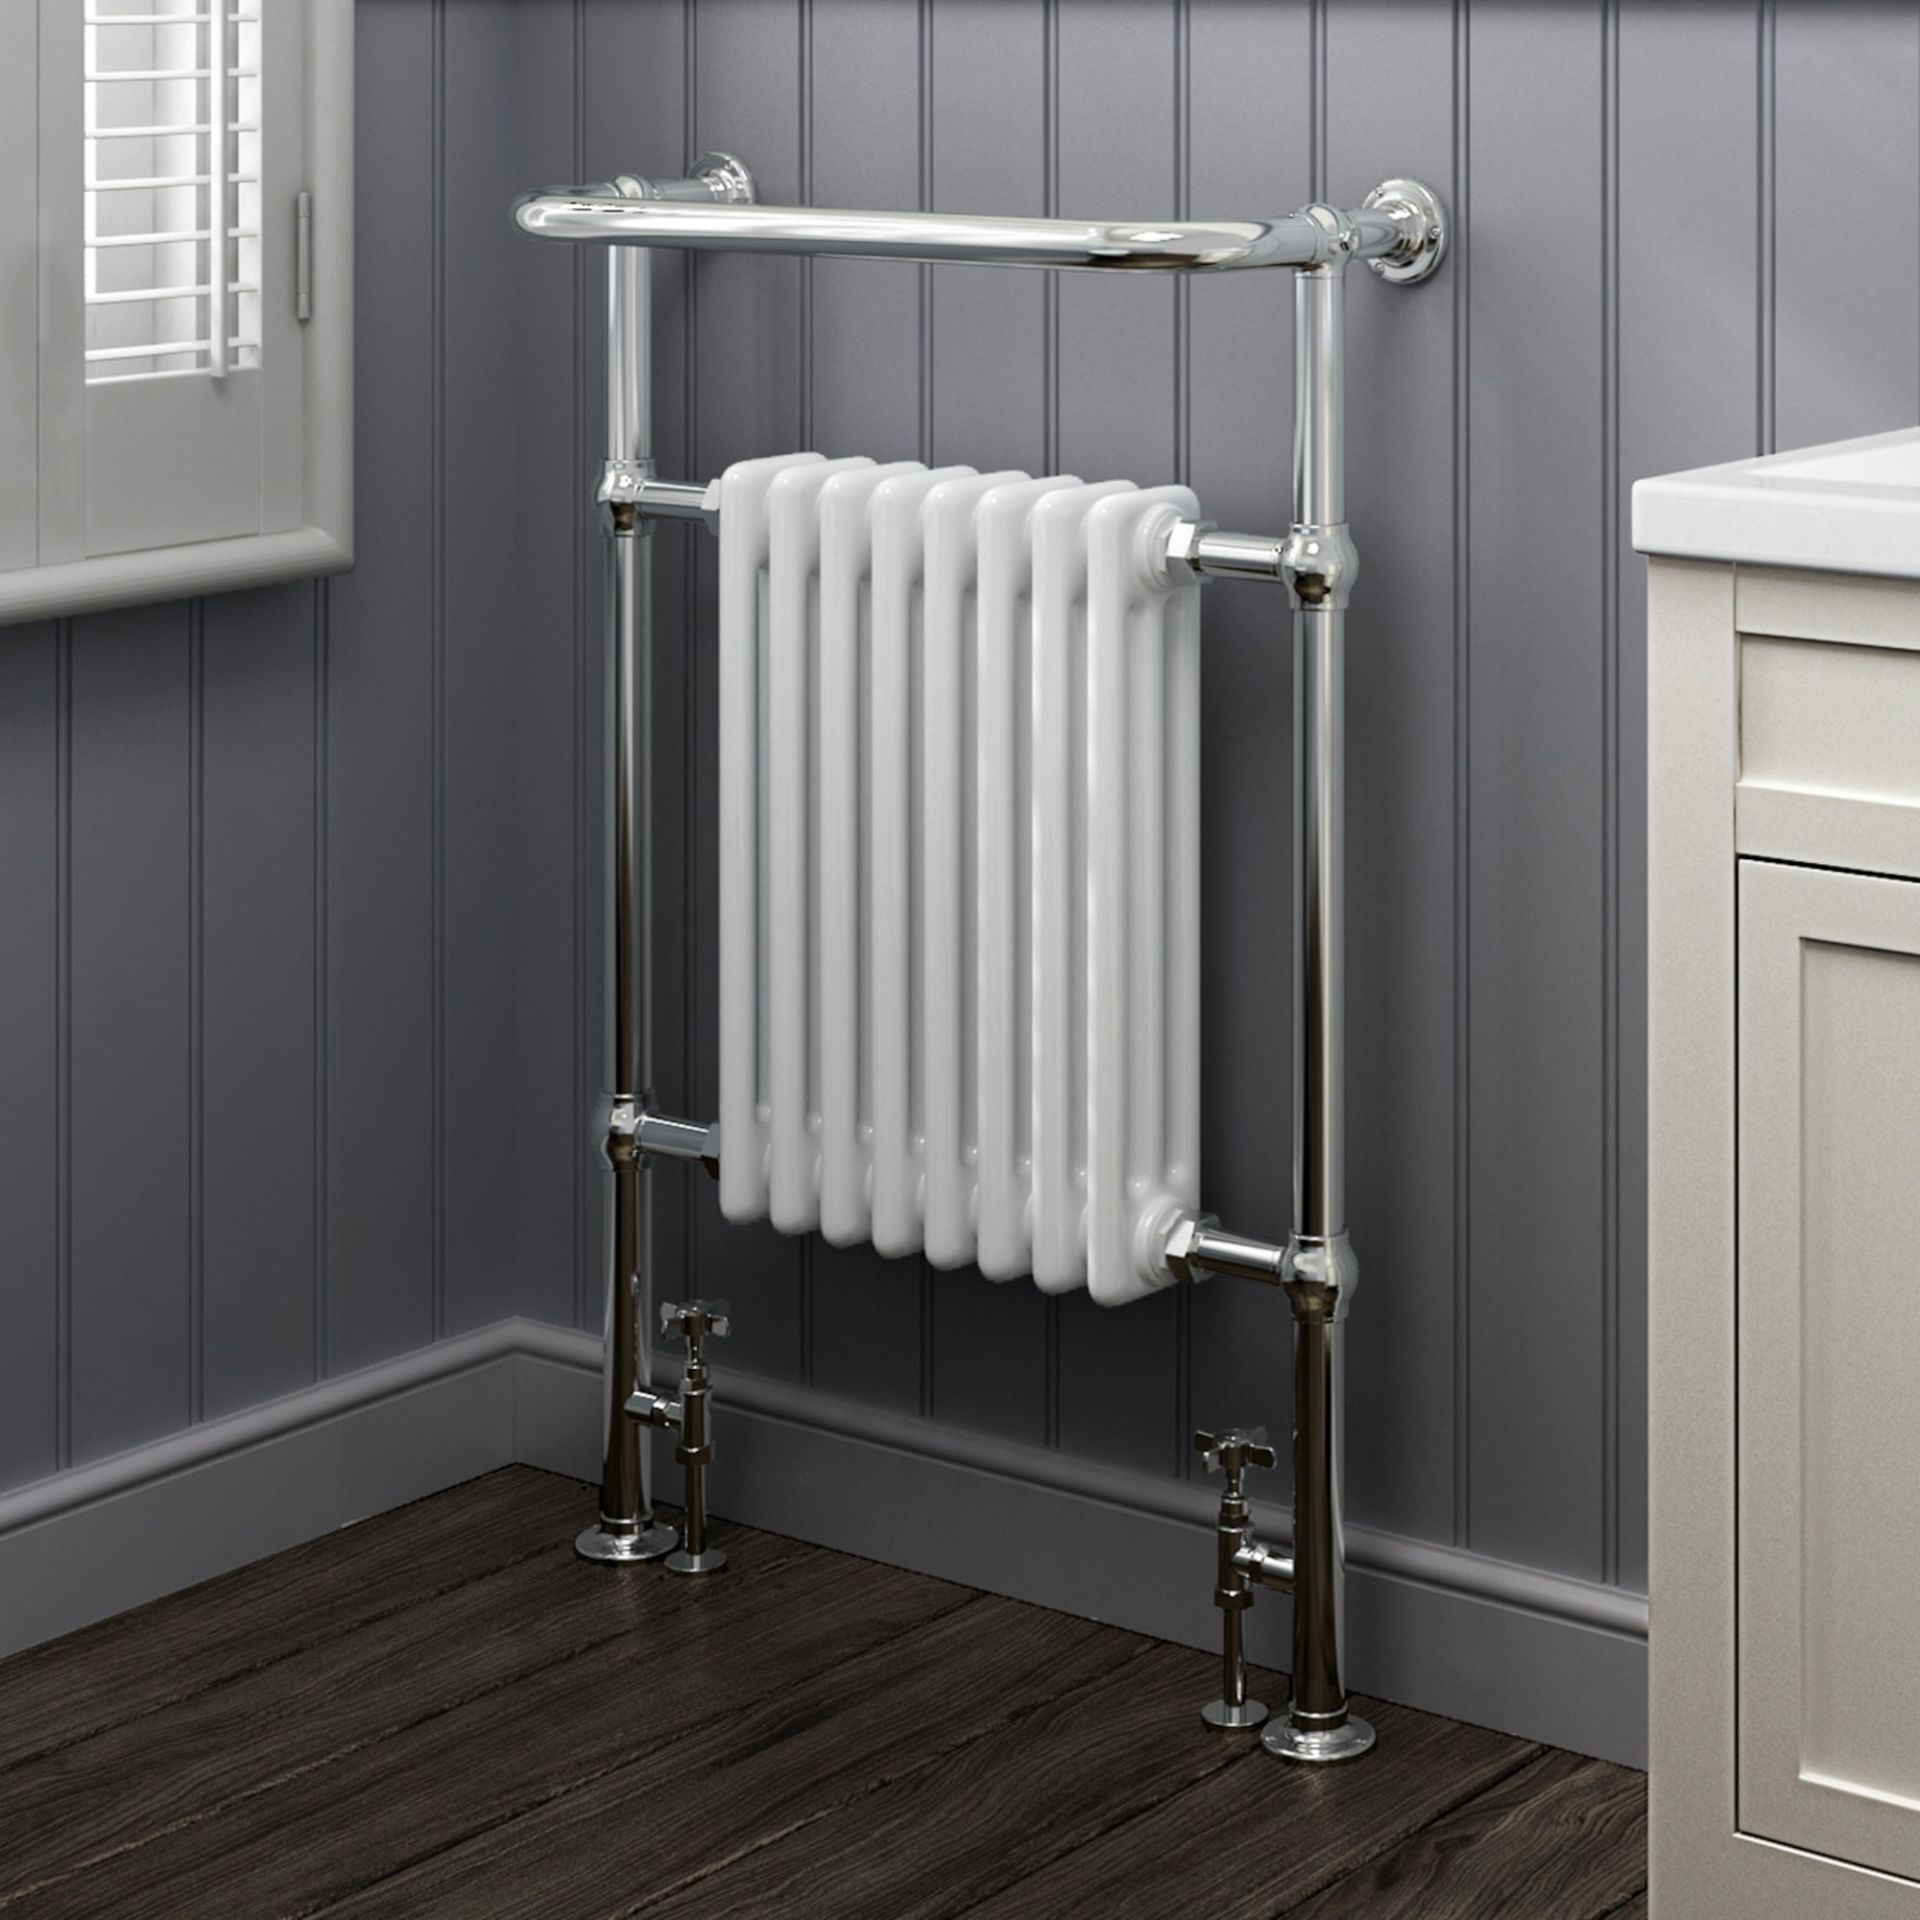 (OS248) 952x659mm Large Traditional White Premium Towel Rail Radiator. We love this because it is